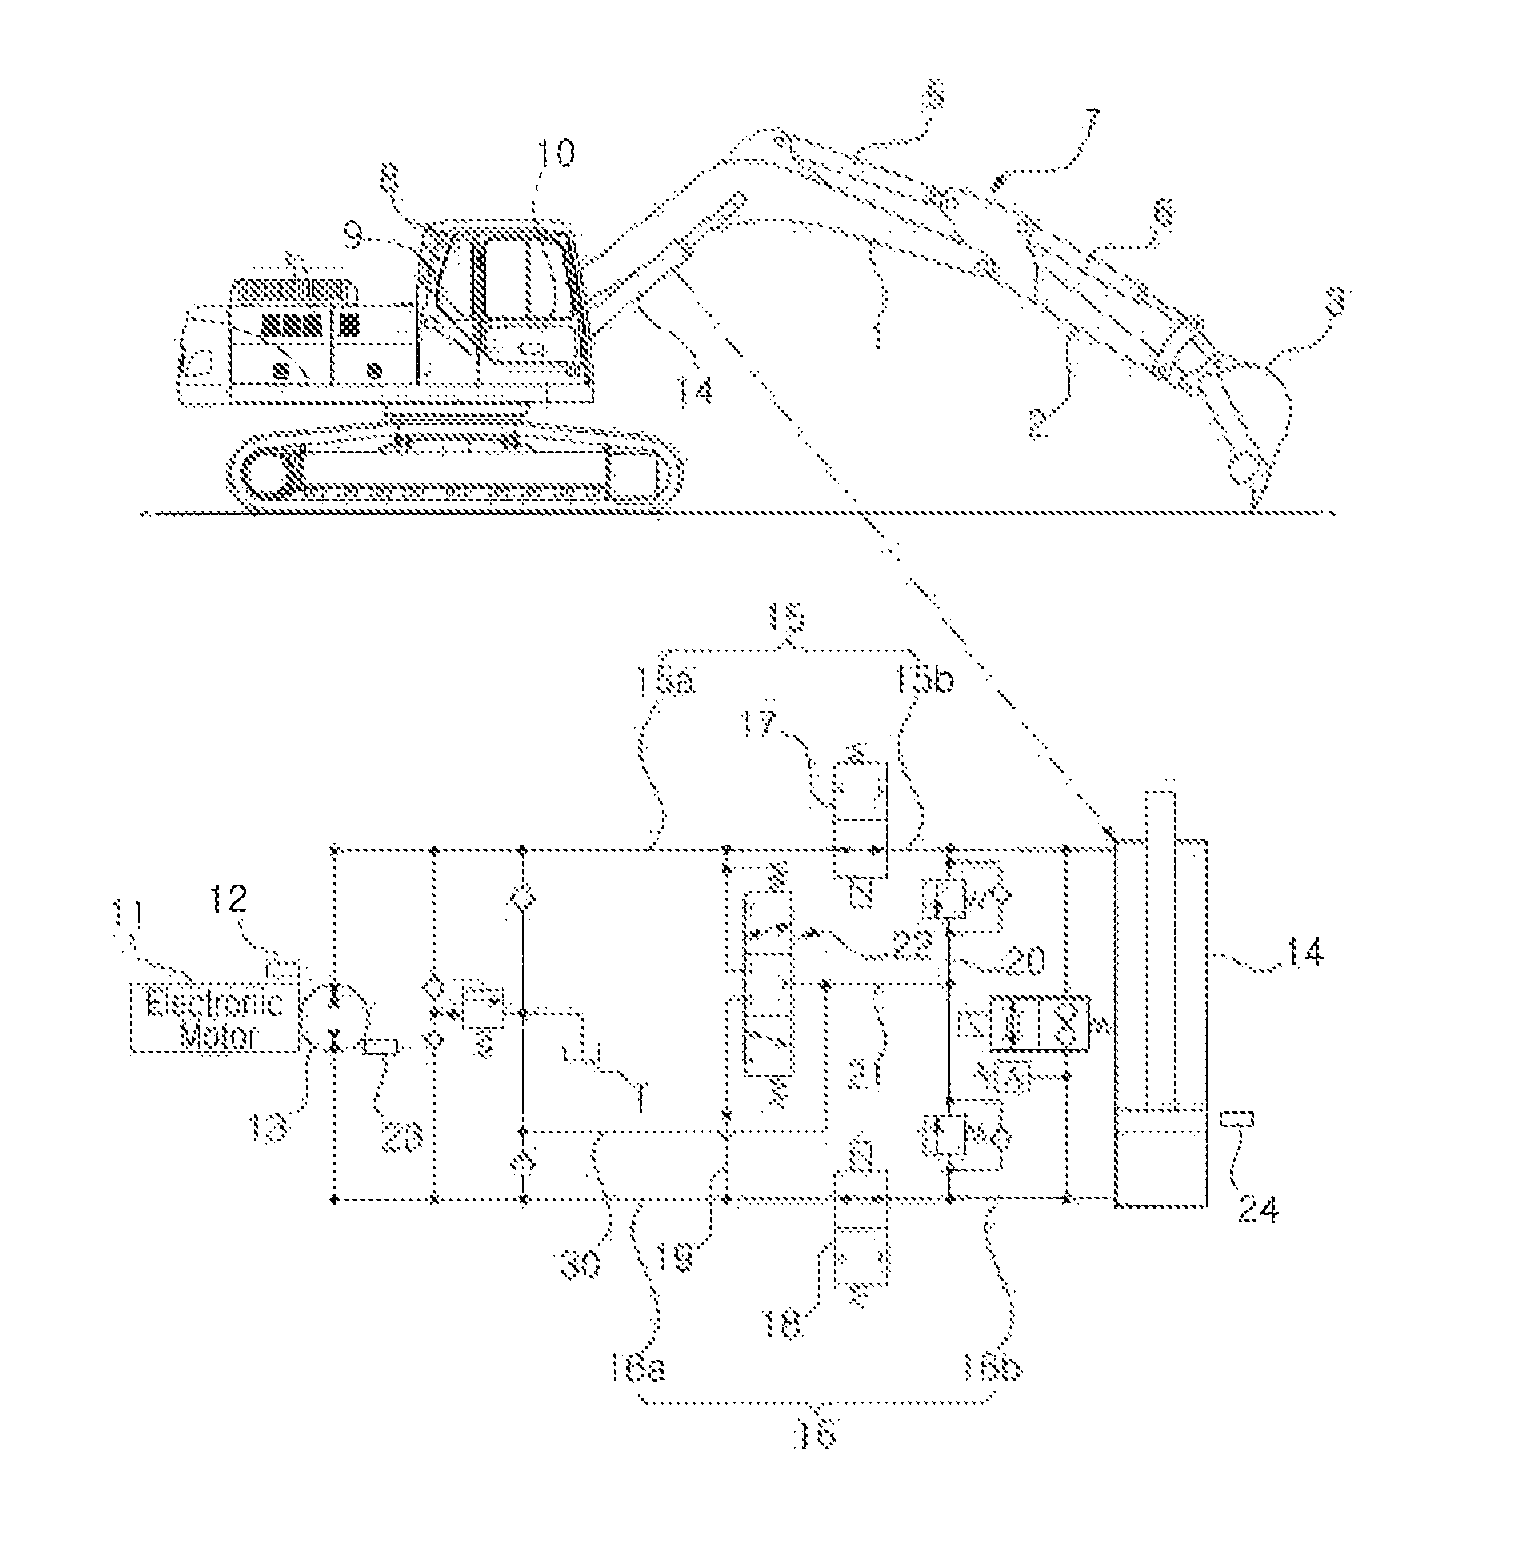 Hybrid excavator including a fast-stopping apparatus for a hybrid actuator